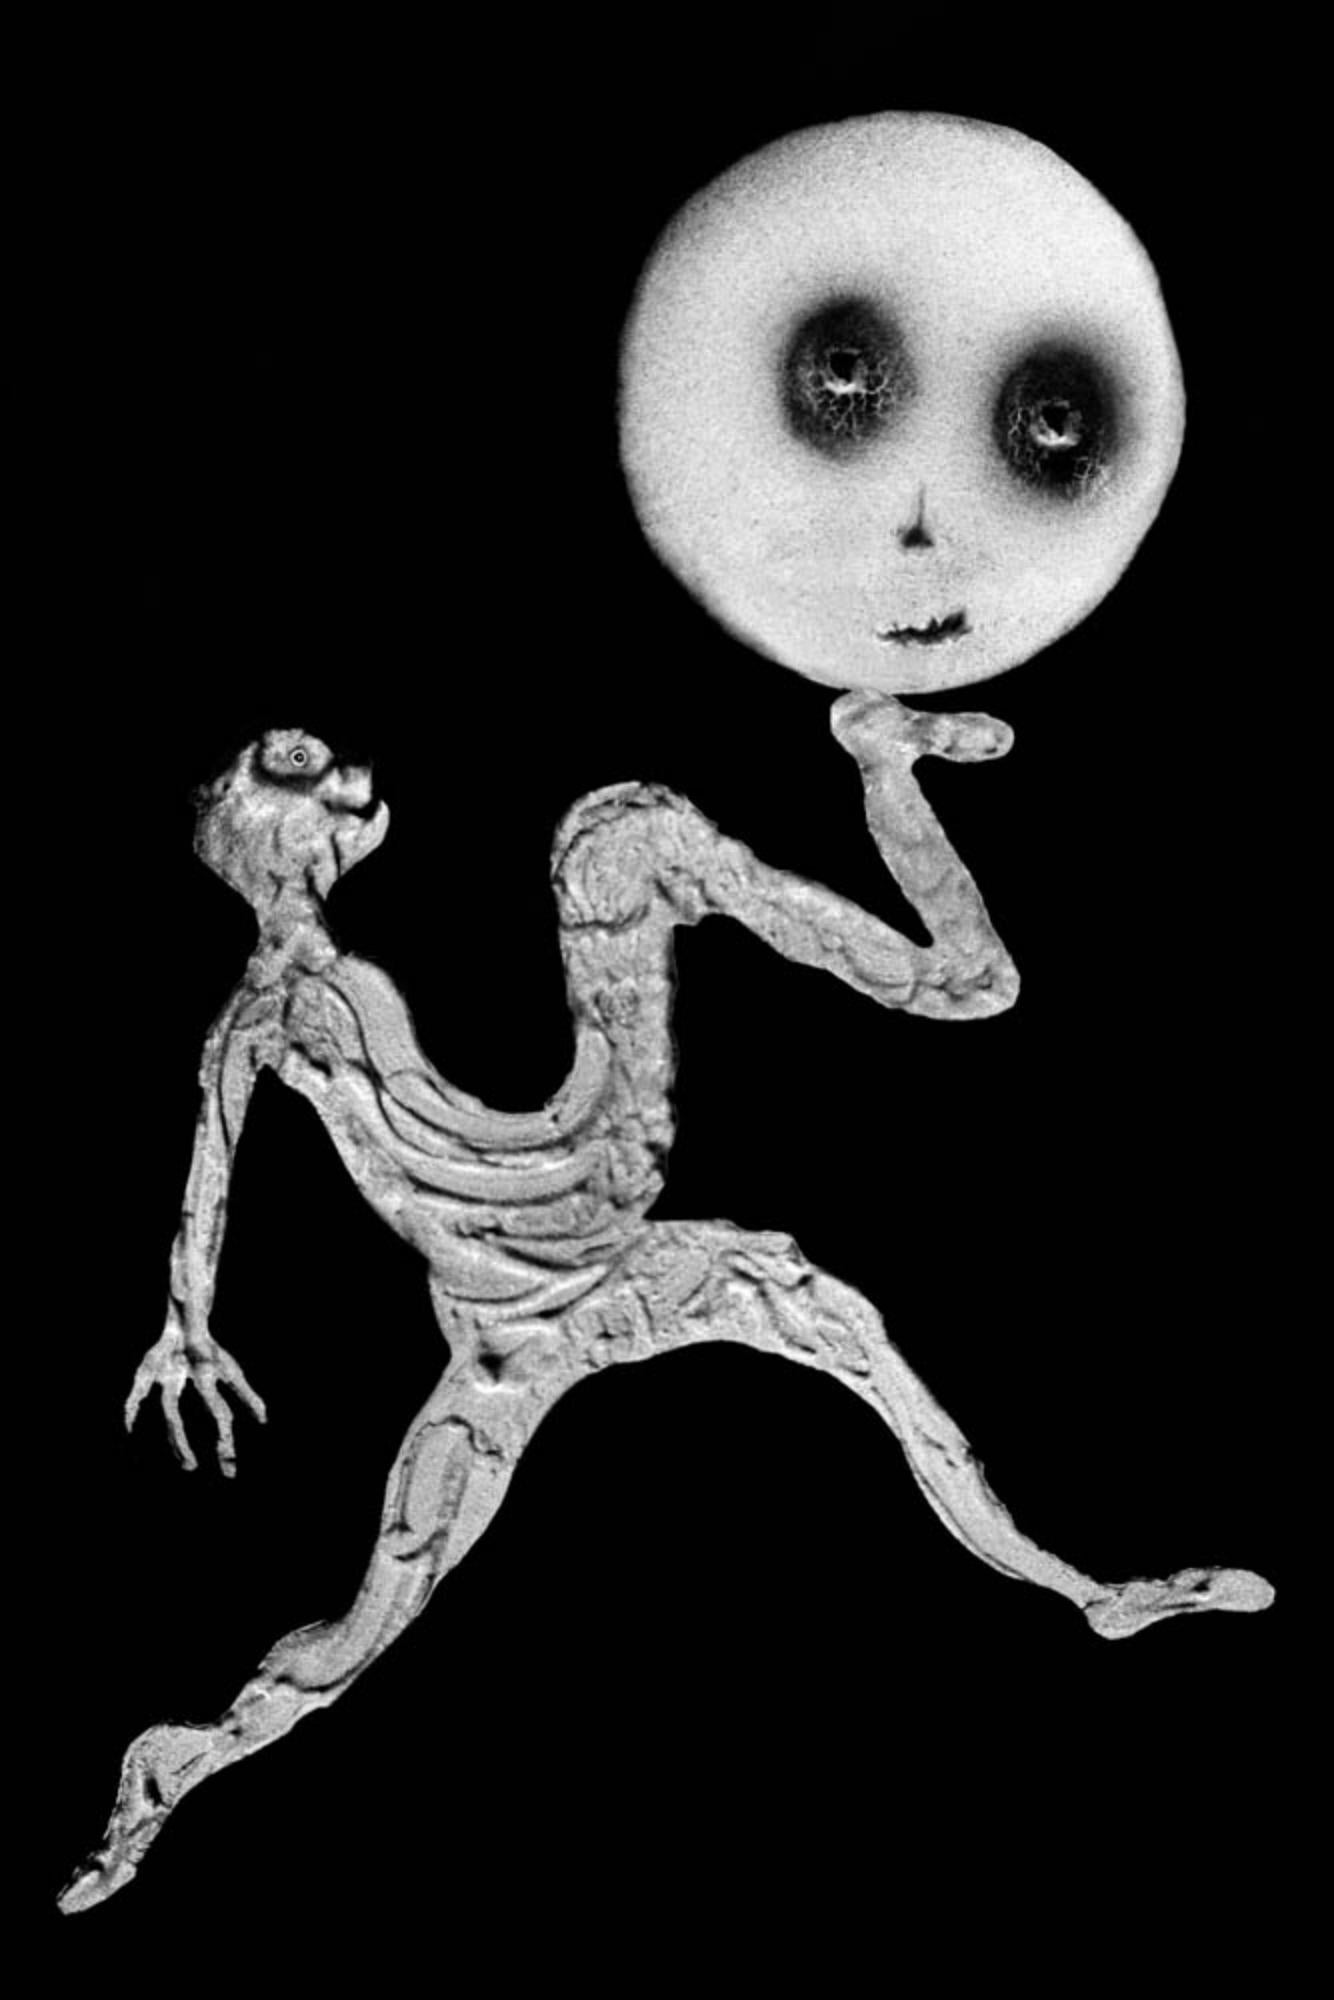 Roger Ballen
Moonrise, from the series 'The Theatre of Apparitions', 2011
One sided Texflex Lightbox, Powder coated Ferro Black
Lightbox 100 x 86 x 9 cm (39 3/8 x 33 7/8 x 3 1/2 in.)
Edition of 3 (#1/3)

All lightboxes can also be purchased as a